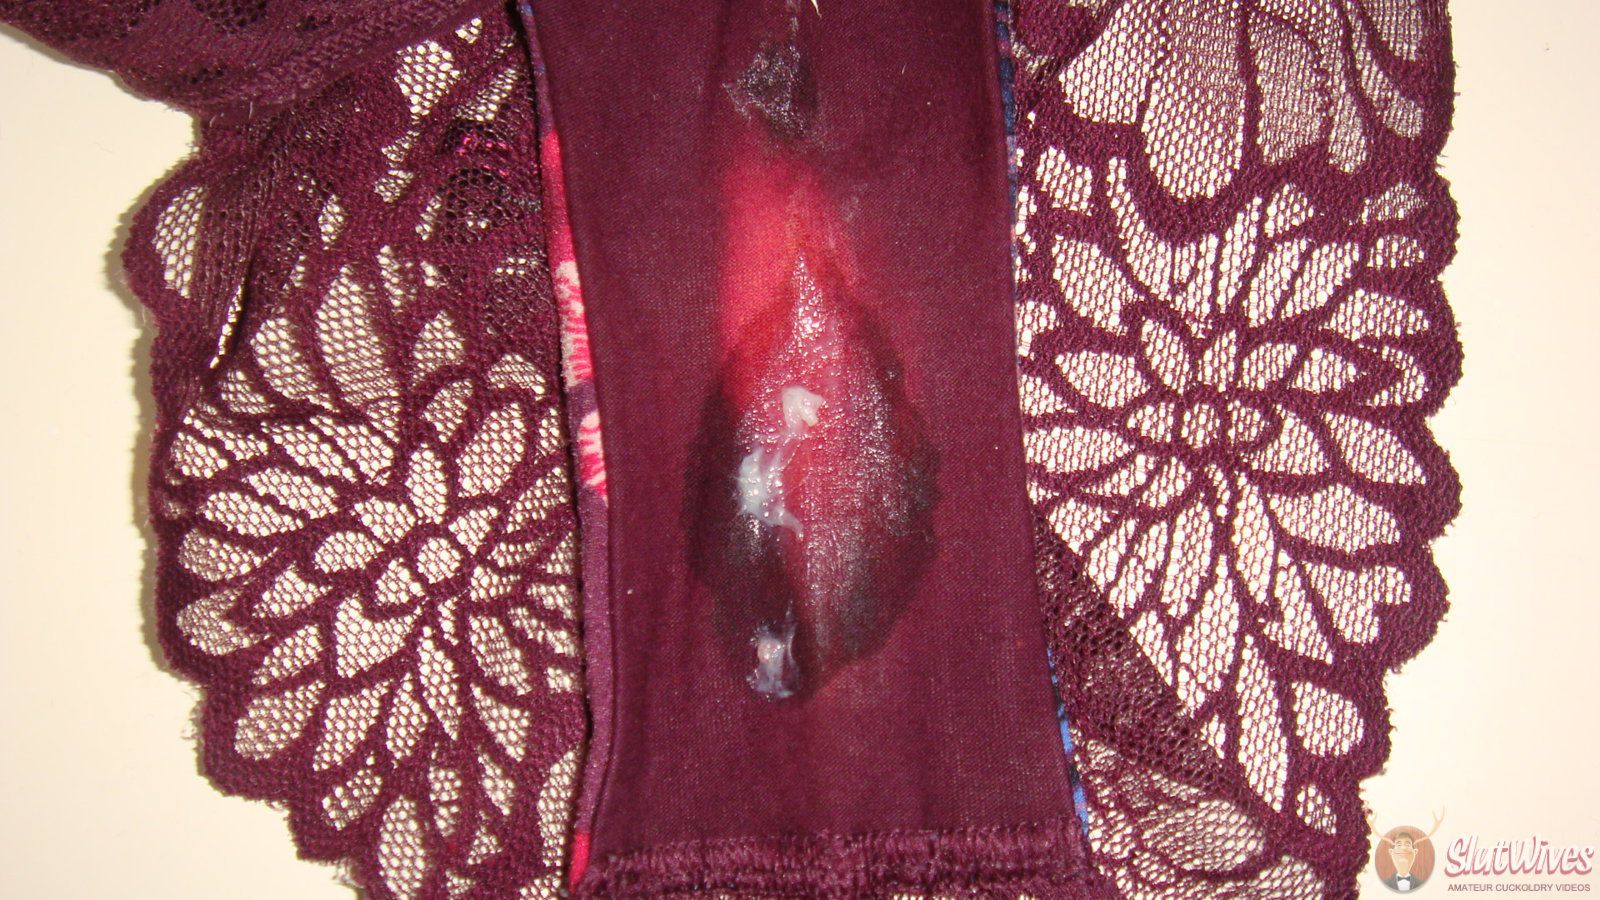 Her cum stained panties